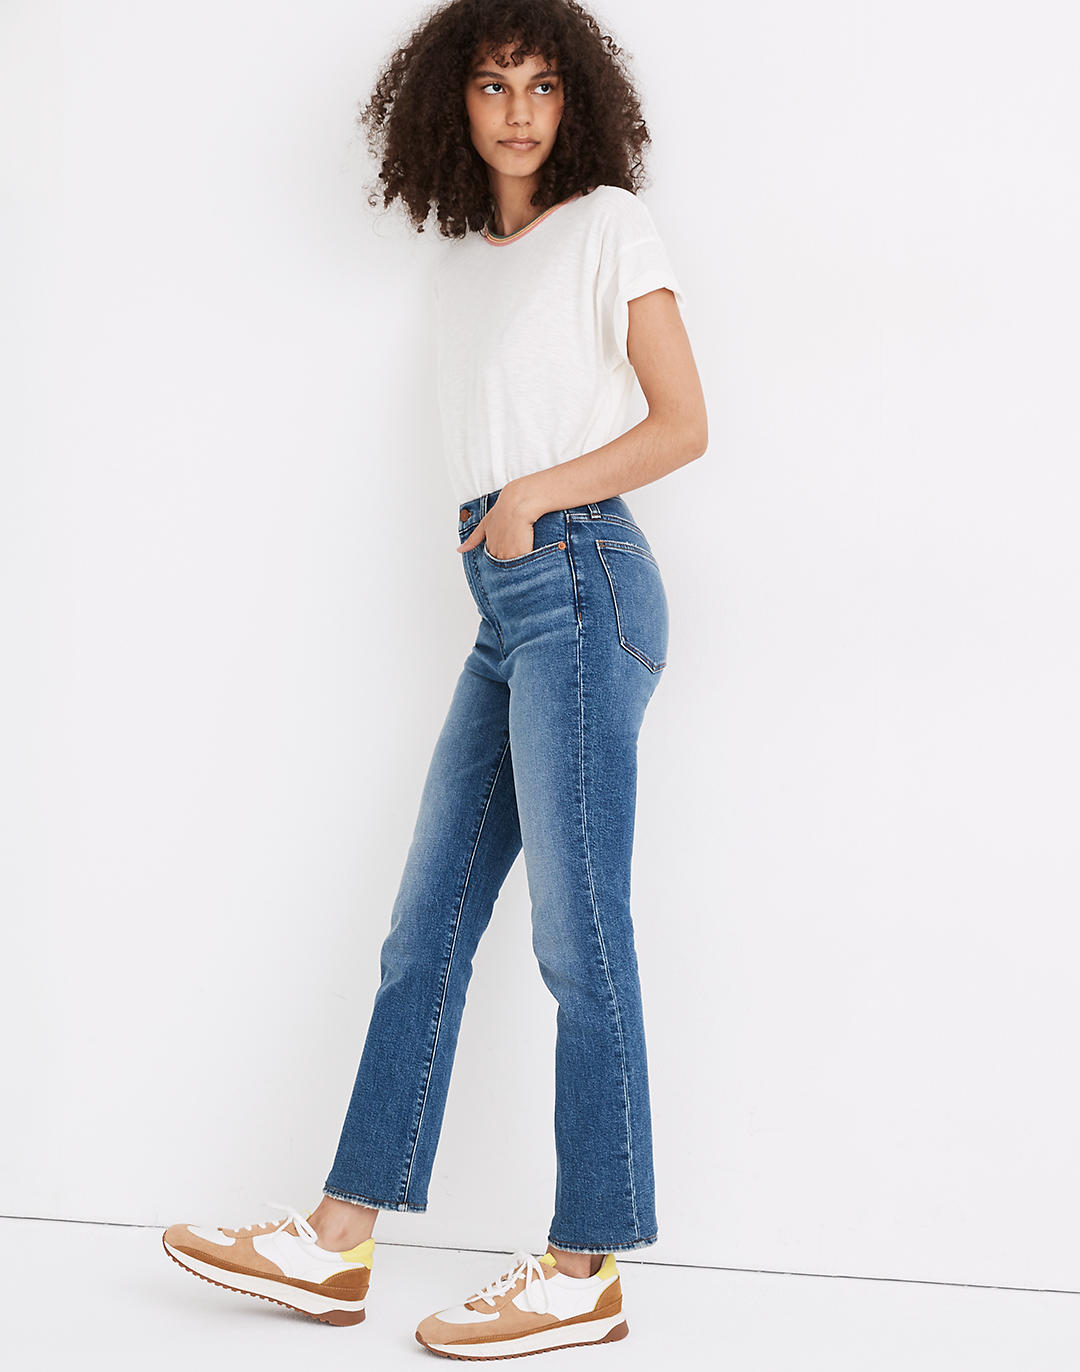 Women's Slim Demi-Boot Jeans in Northaven Wash | Madewell